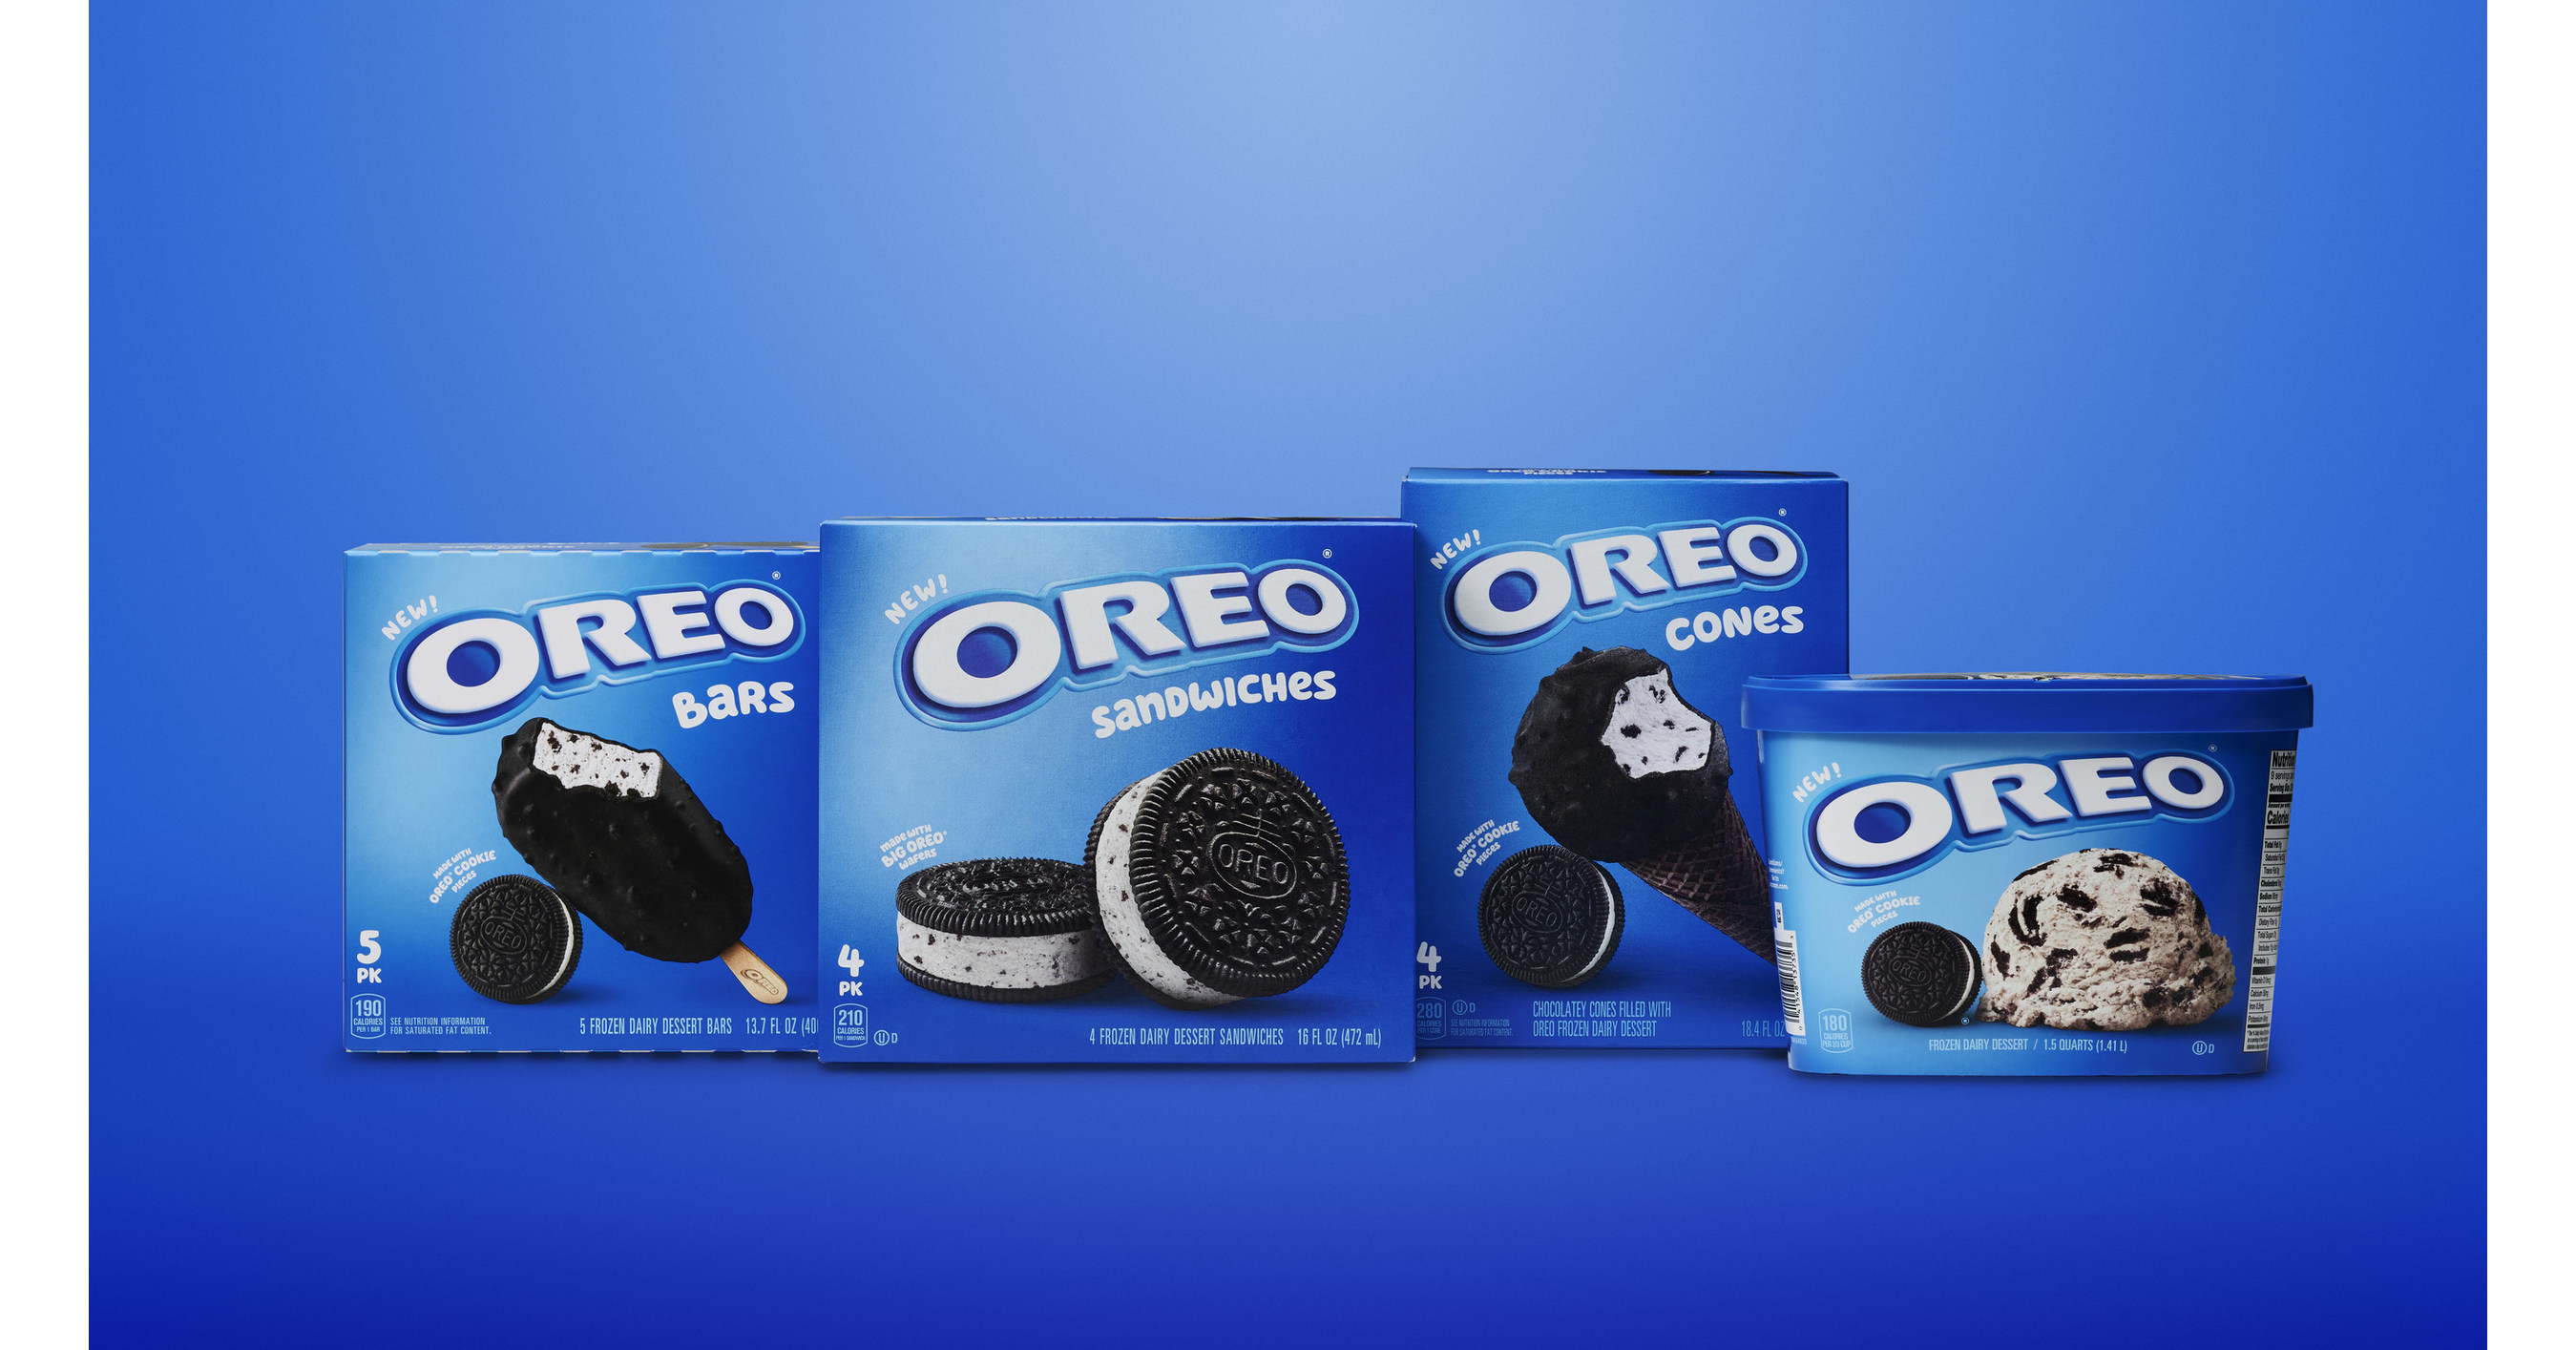 Milka Chocolate Releases an Oreo Flavor in the US